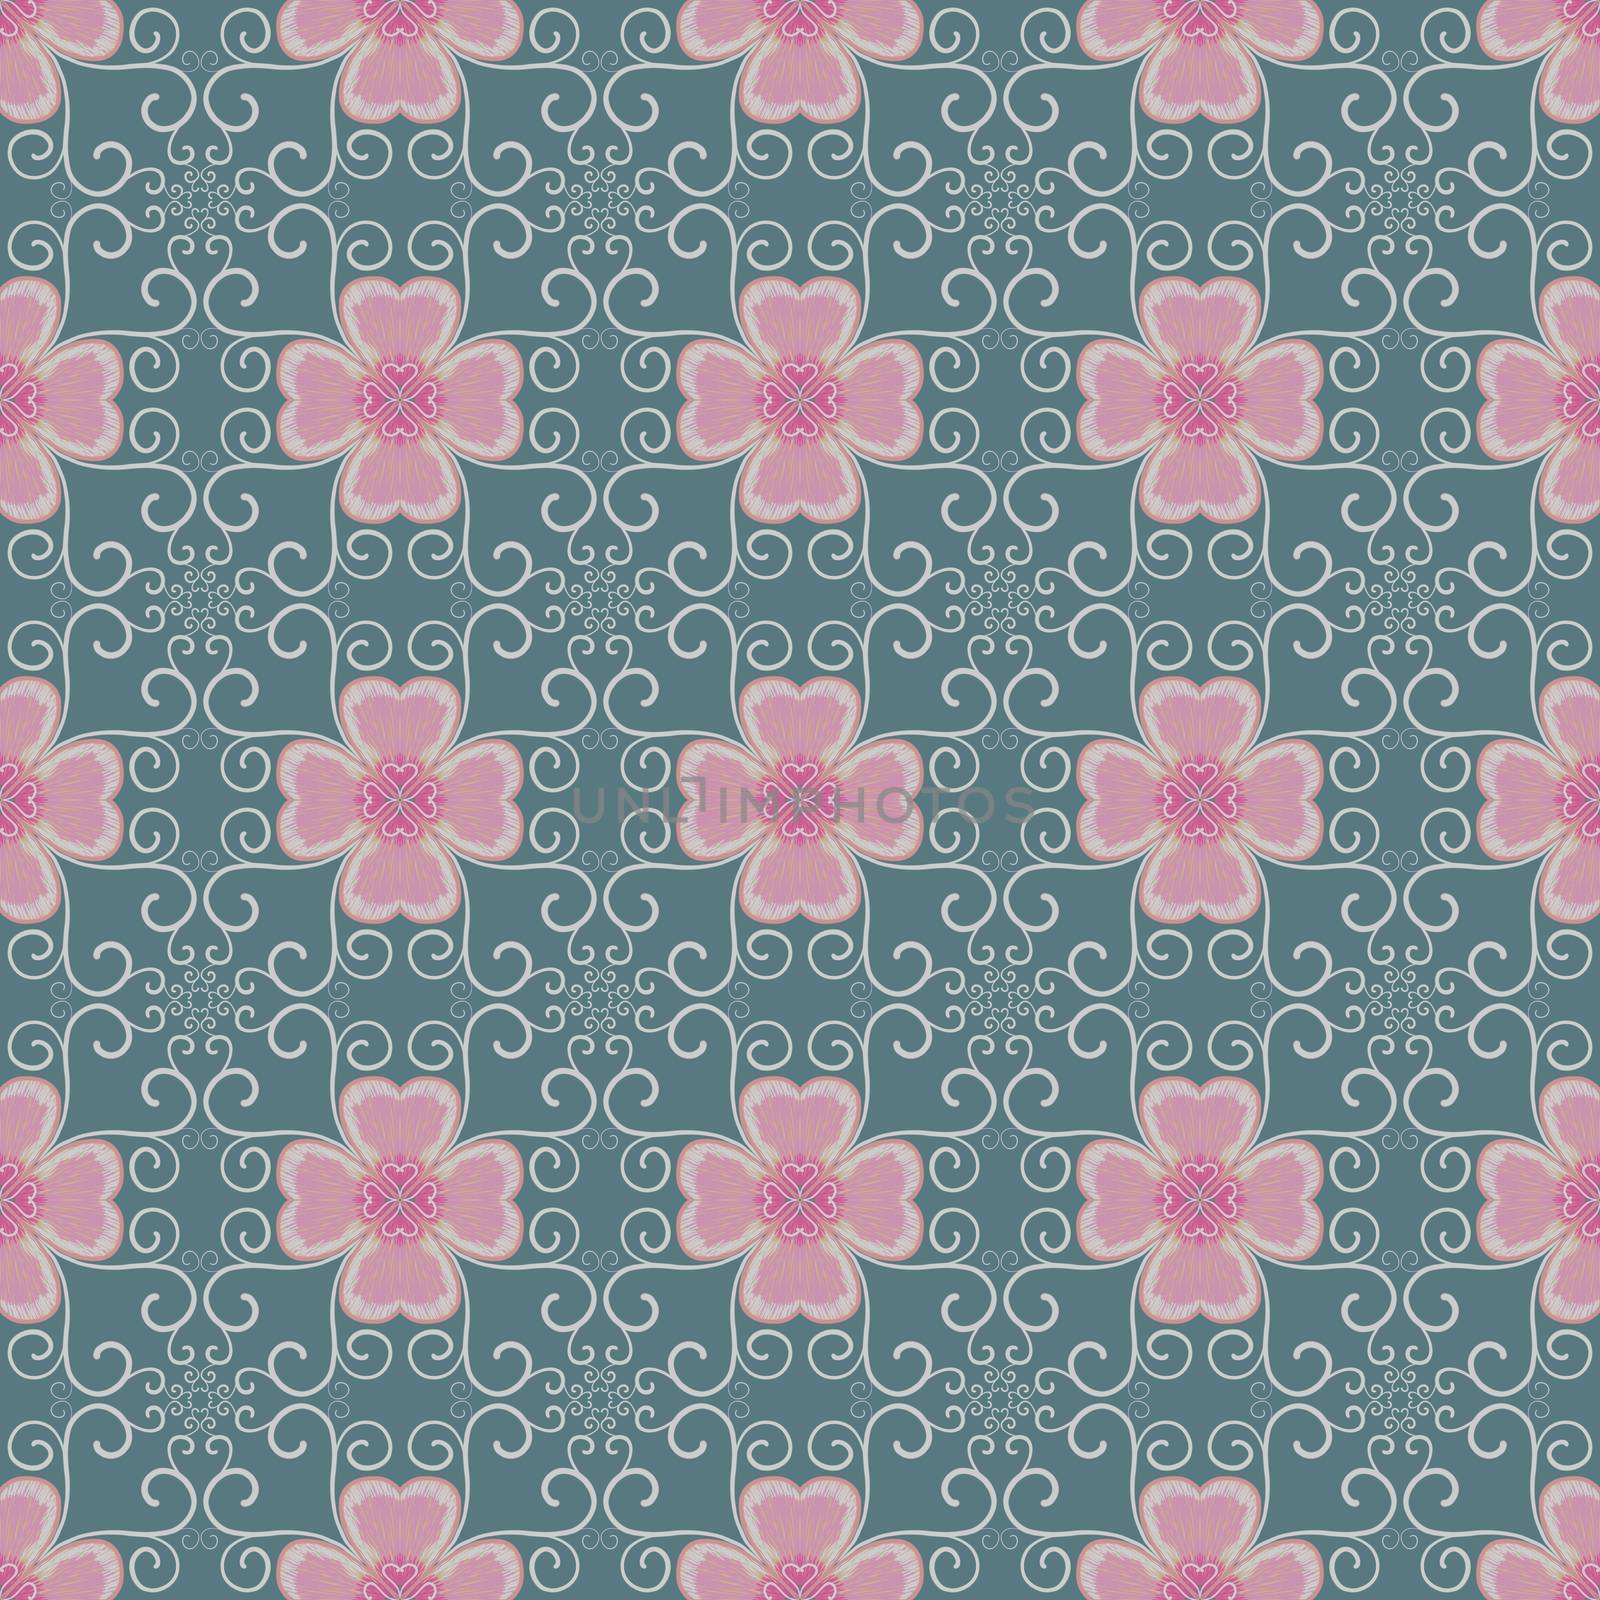 Pink flower and ivy on green background seamless patterns by eaglesky